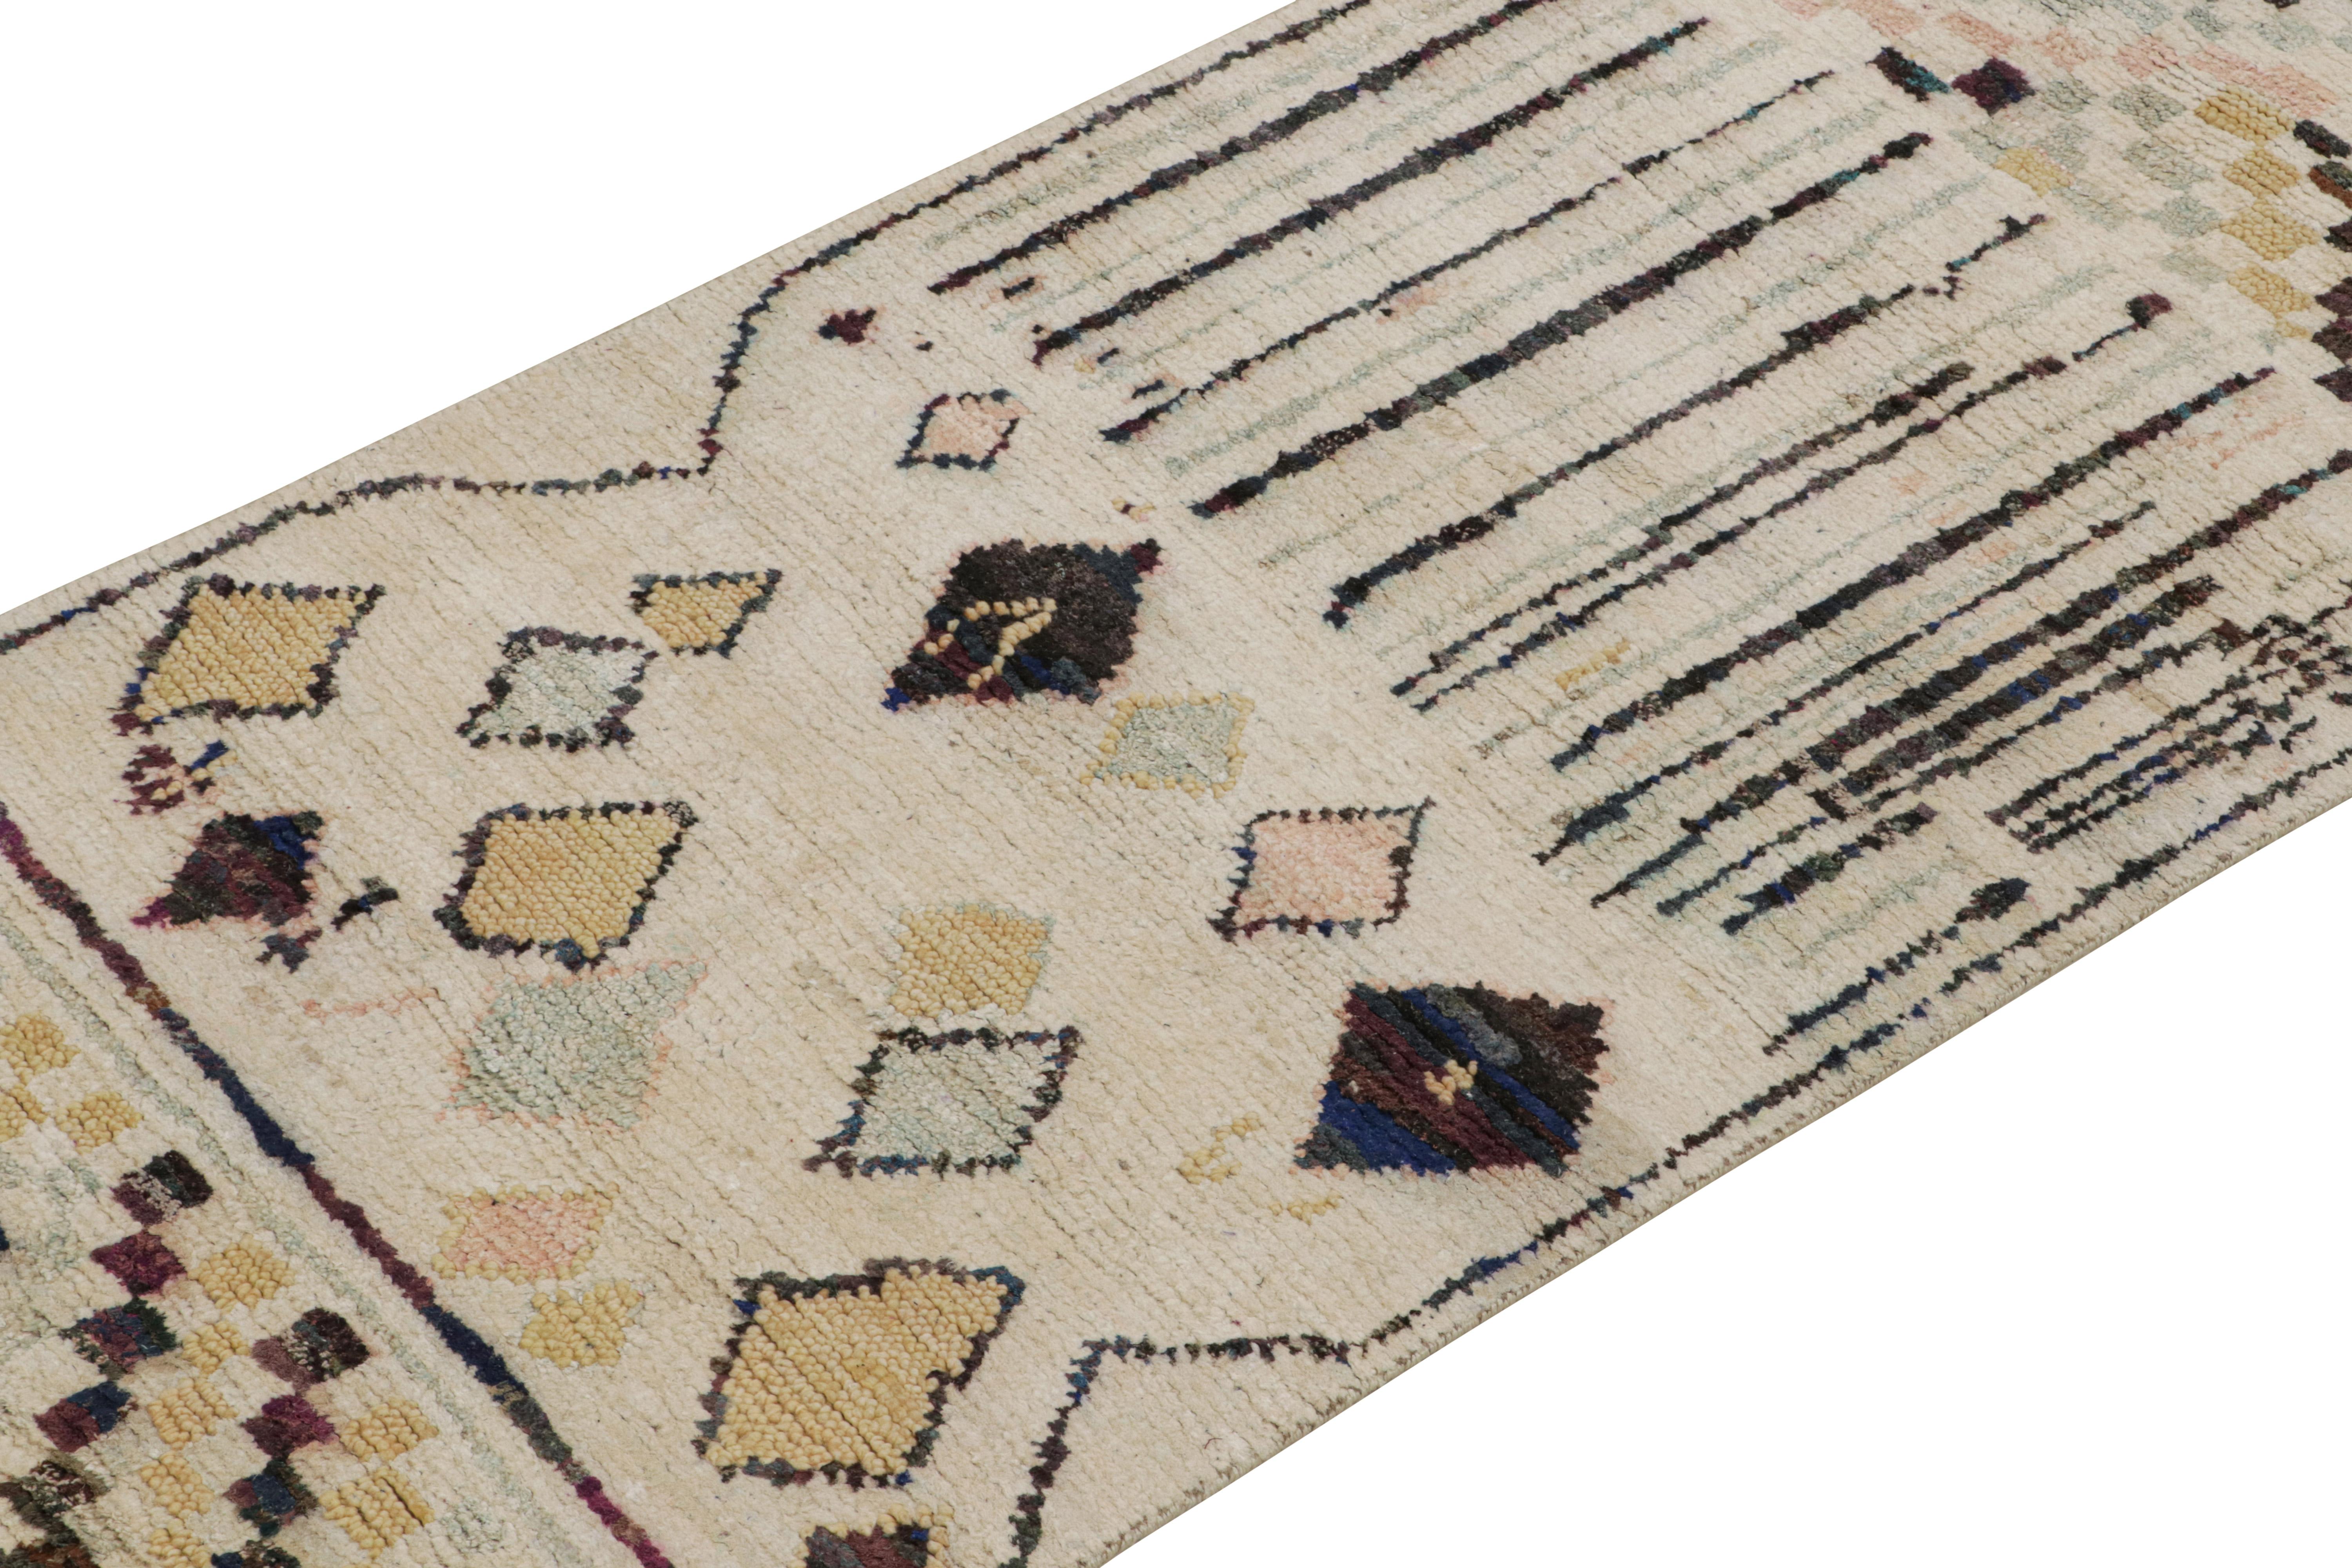 Indian Rug & Kilim’s Moroccan Style Runner Rug in Beige & Multicolor Geometric Patterns For Sale